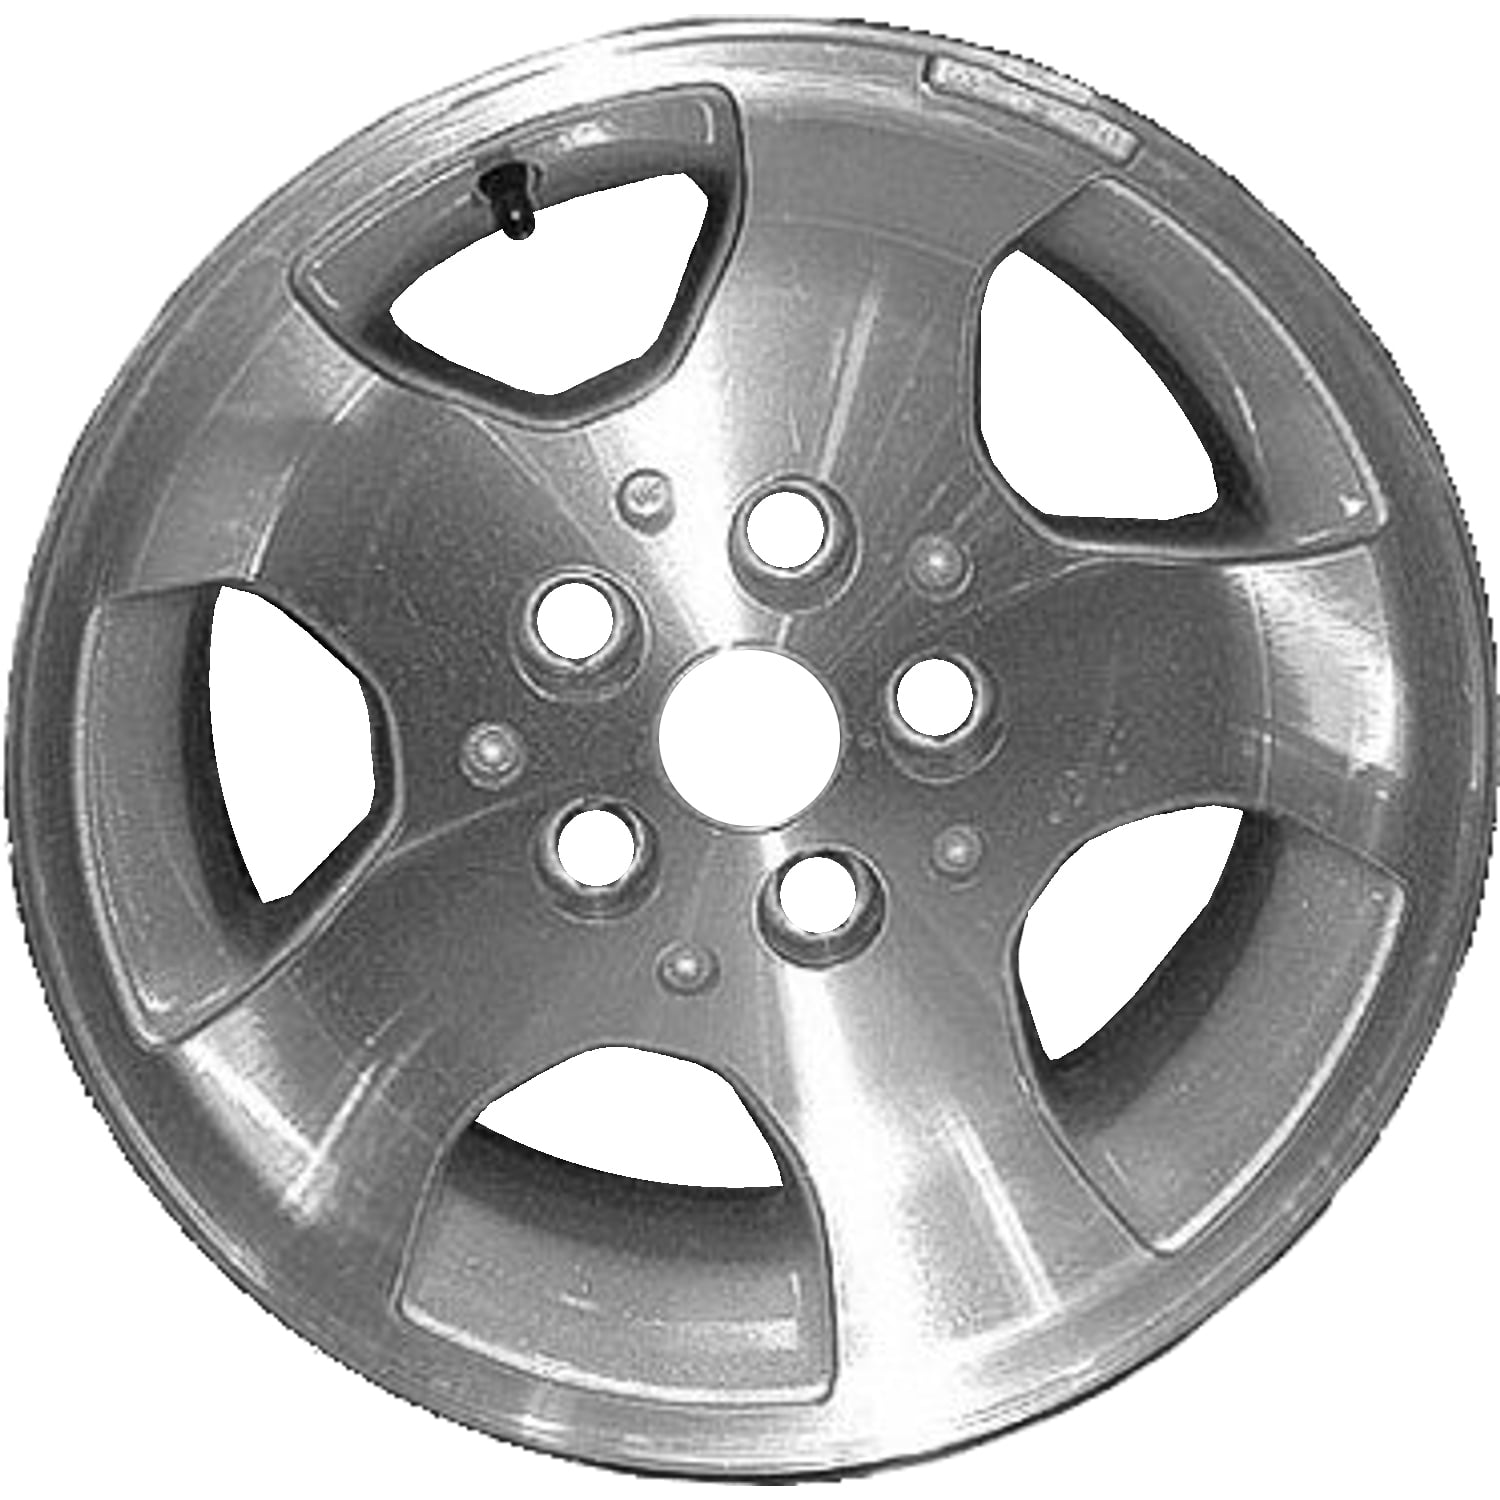 15 X 8 Reconditioned OEM Aluminum Alloy Wheel, Sparkle Silver, Fits  2000-2006 Jeep Wrangler 